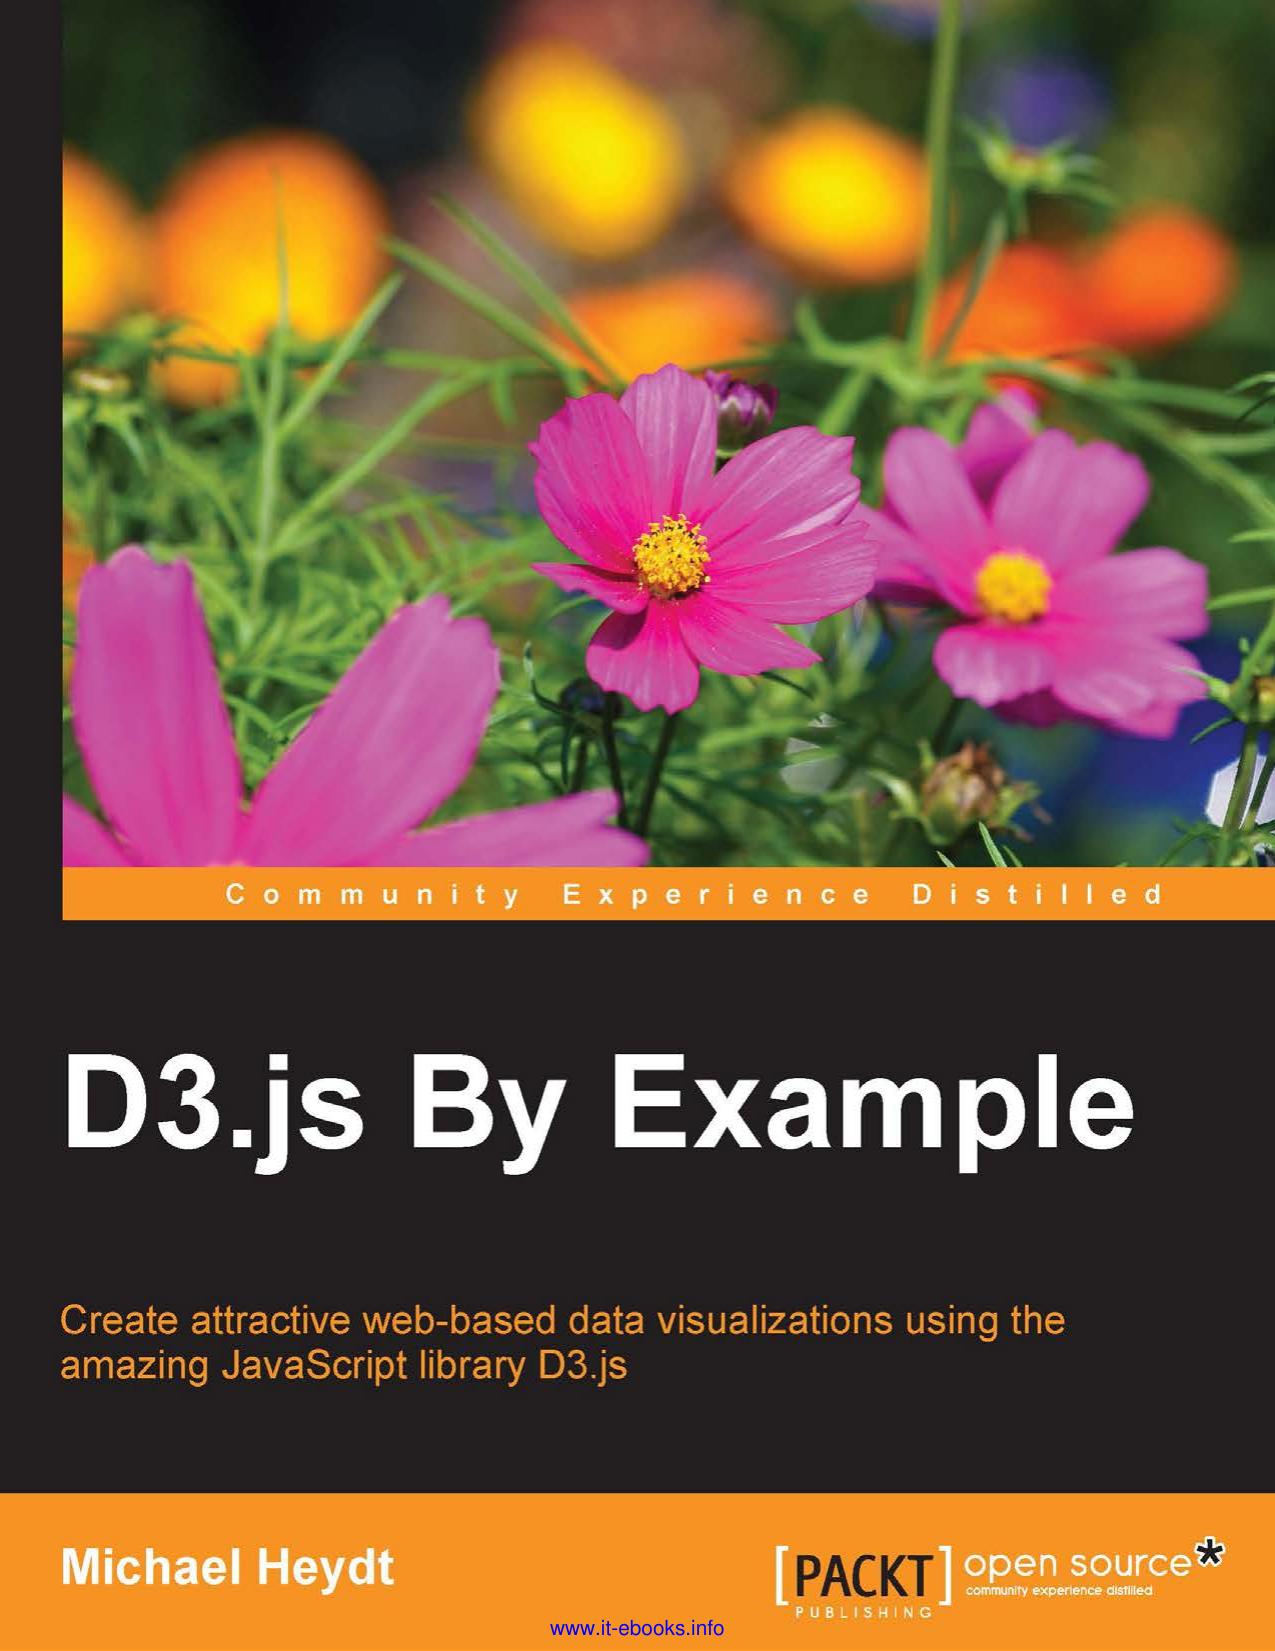 D3.Js by Example